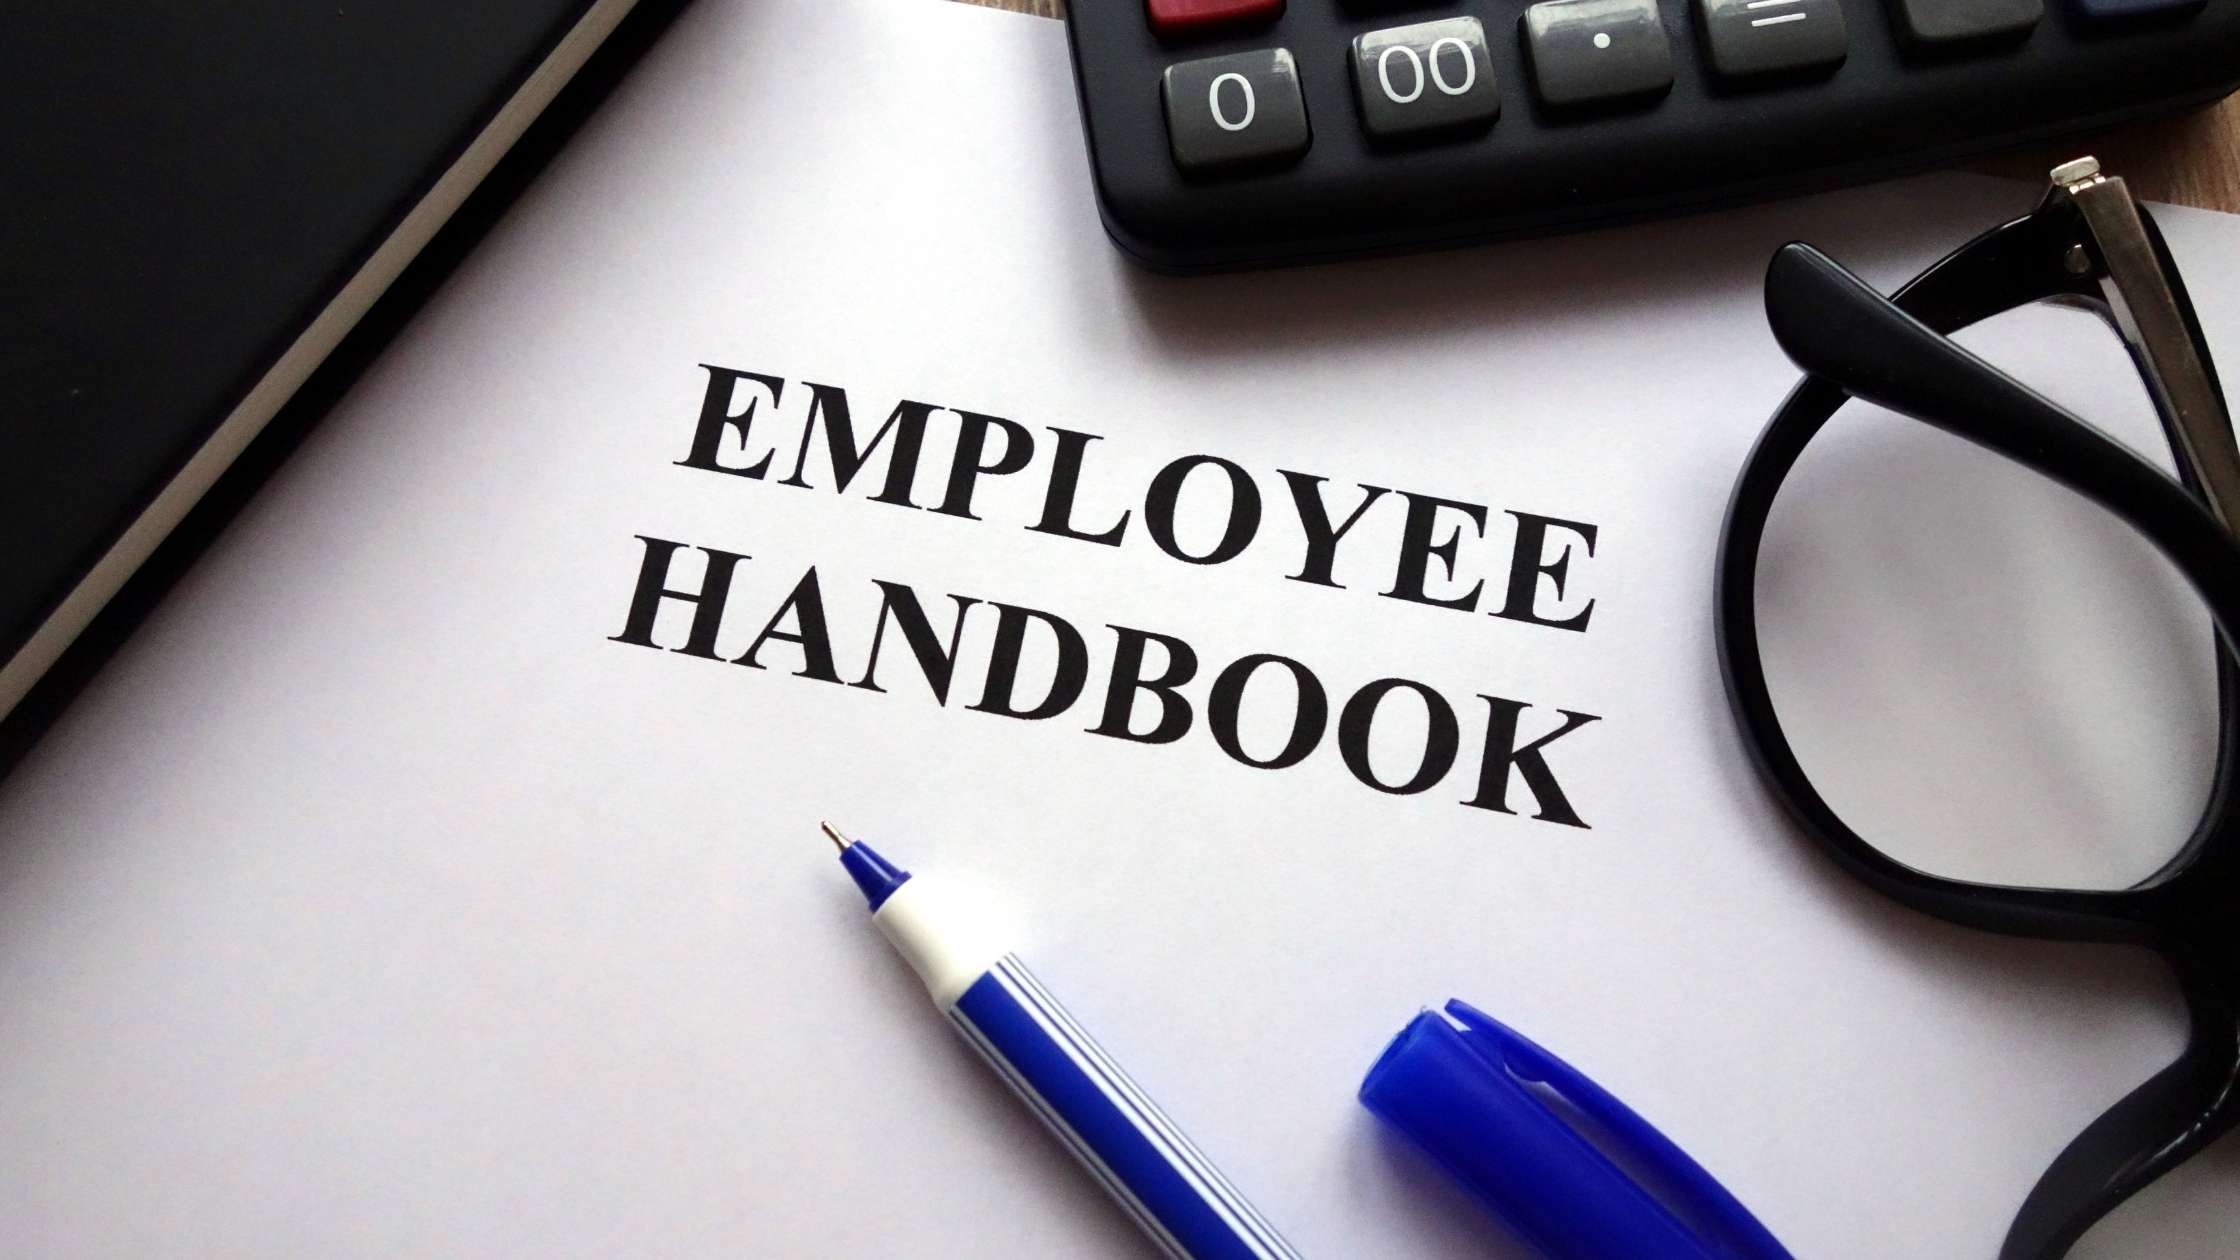 How to set up and maintain a compliant employee handbook in California